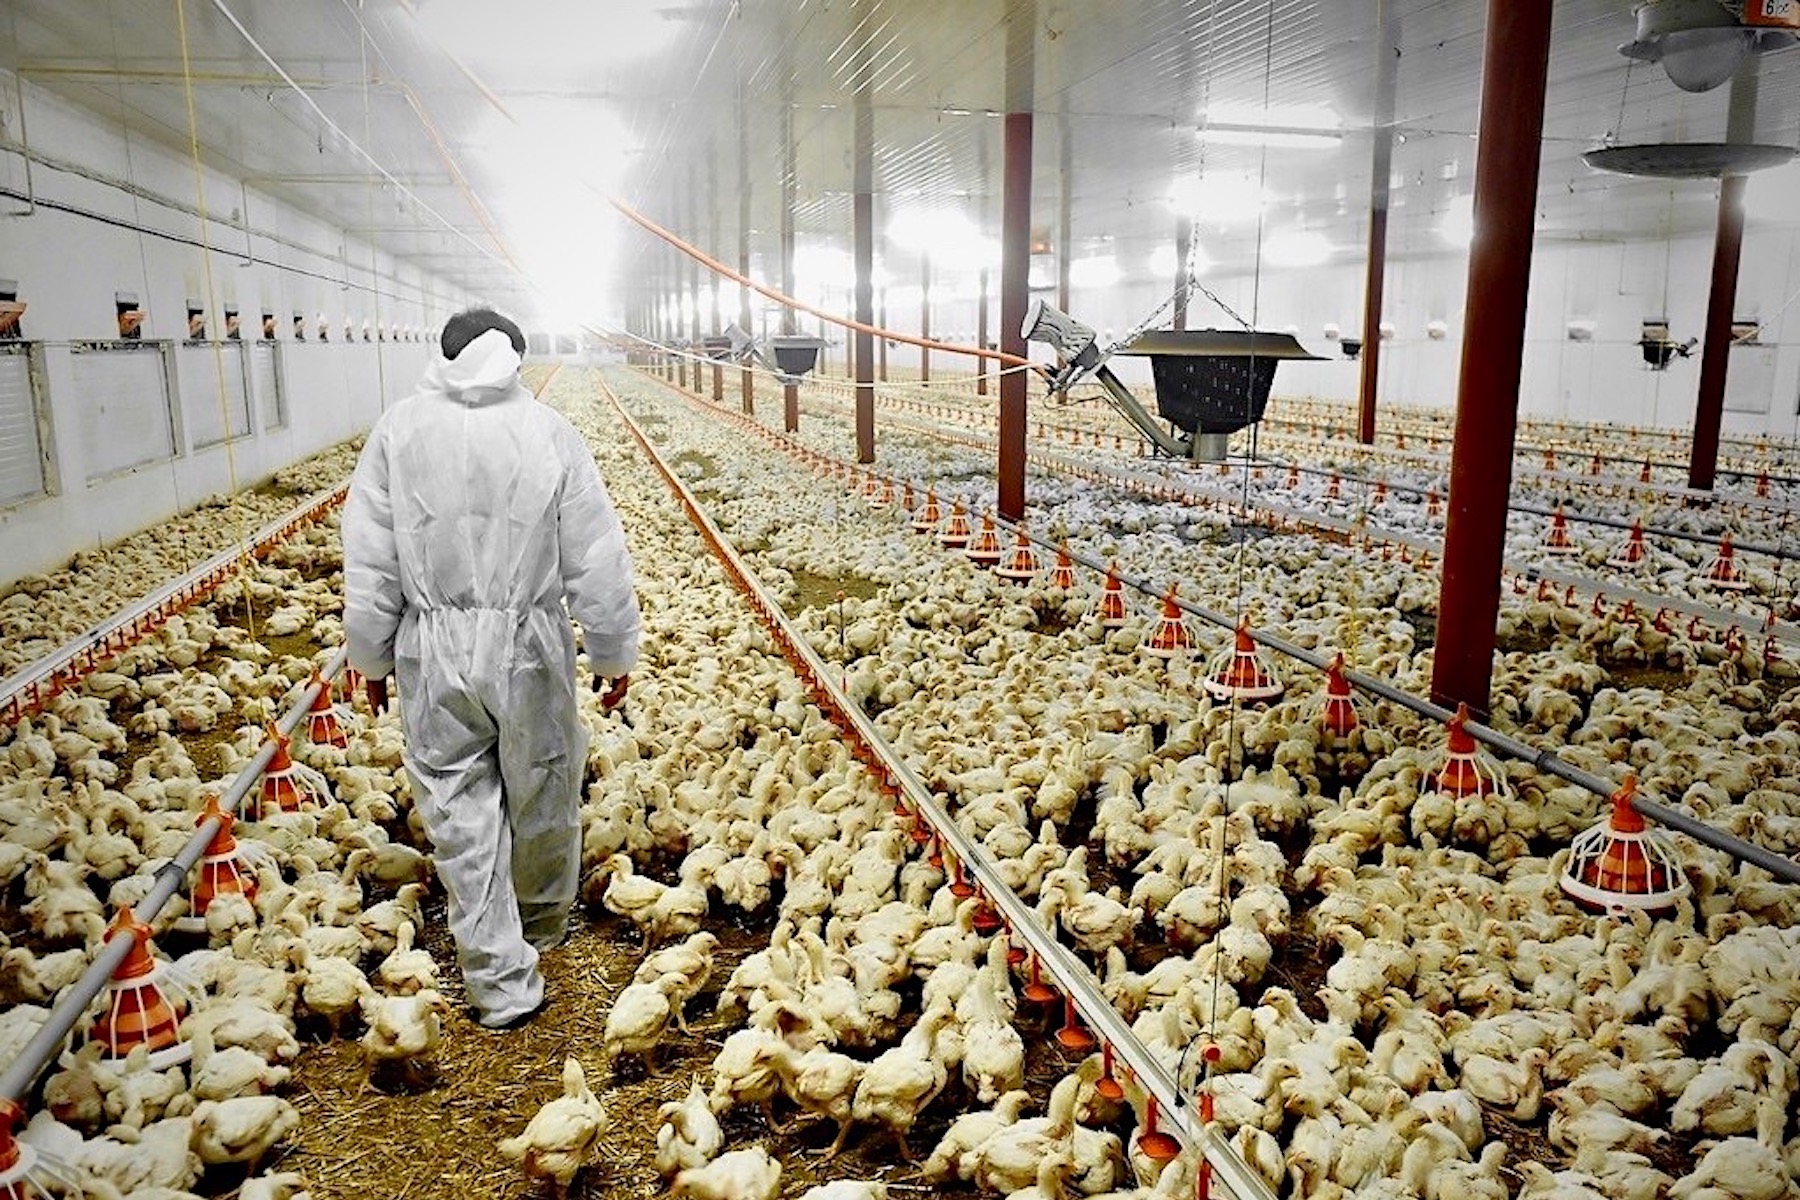 Factory Farmed Animals: Is Factory Farming Bad for Animals? - GenV